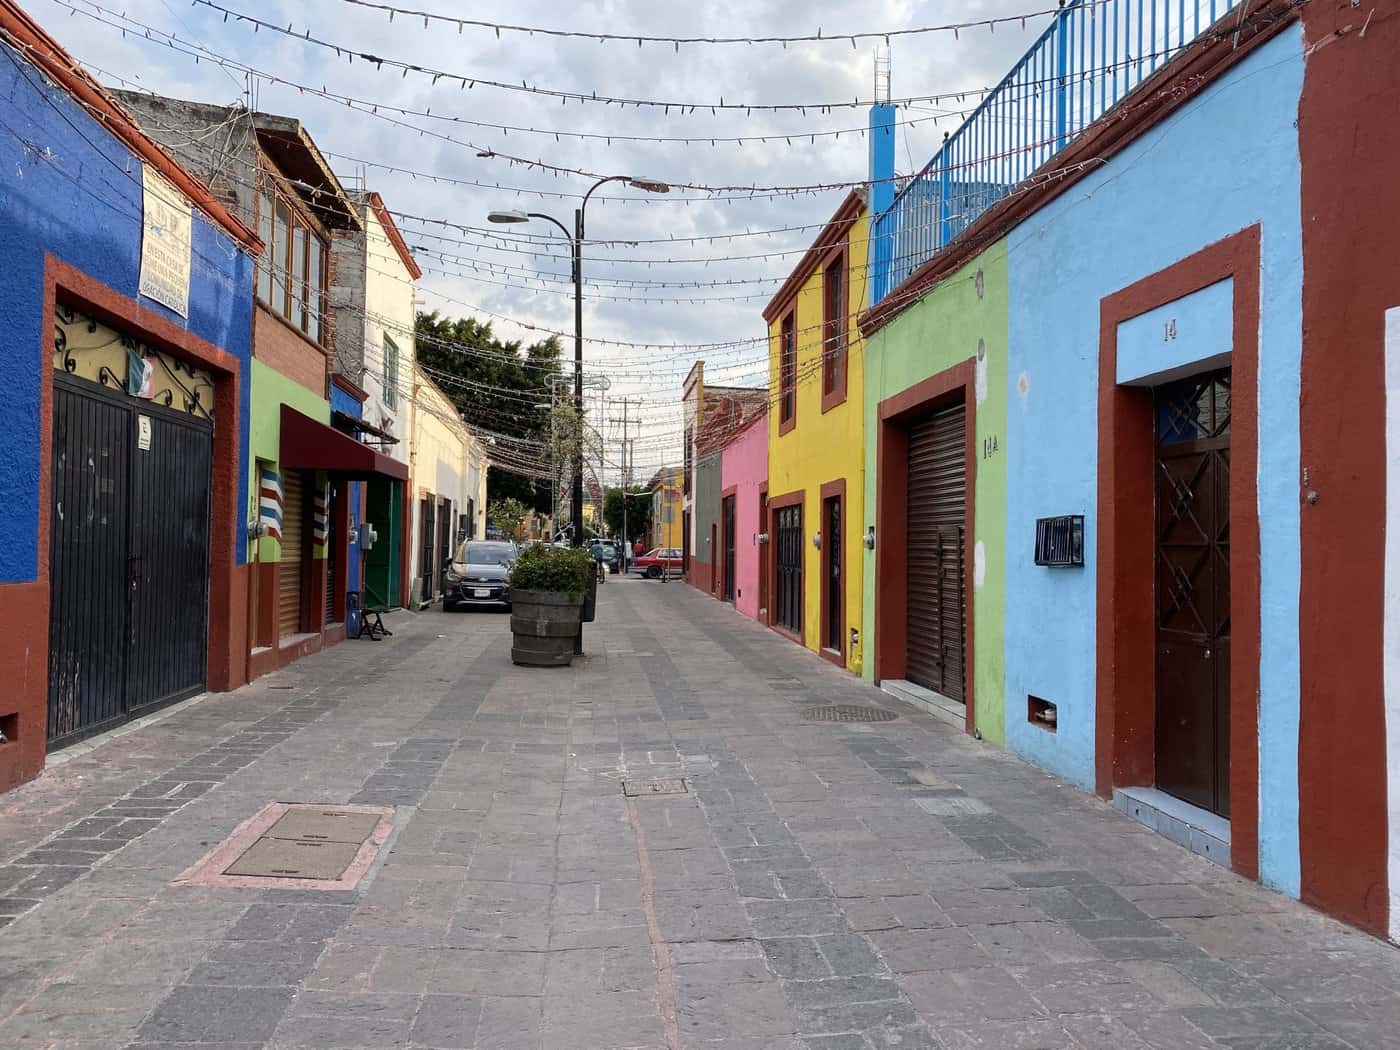 A pedestreian alley with colorful houses